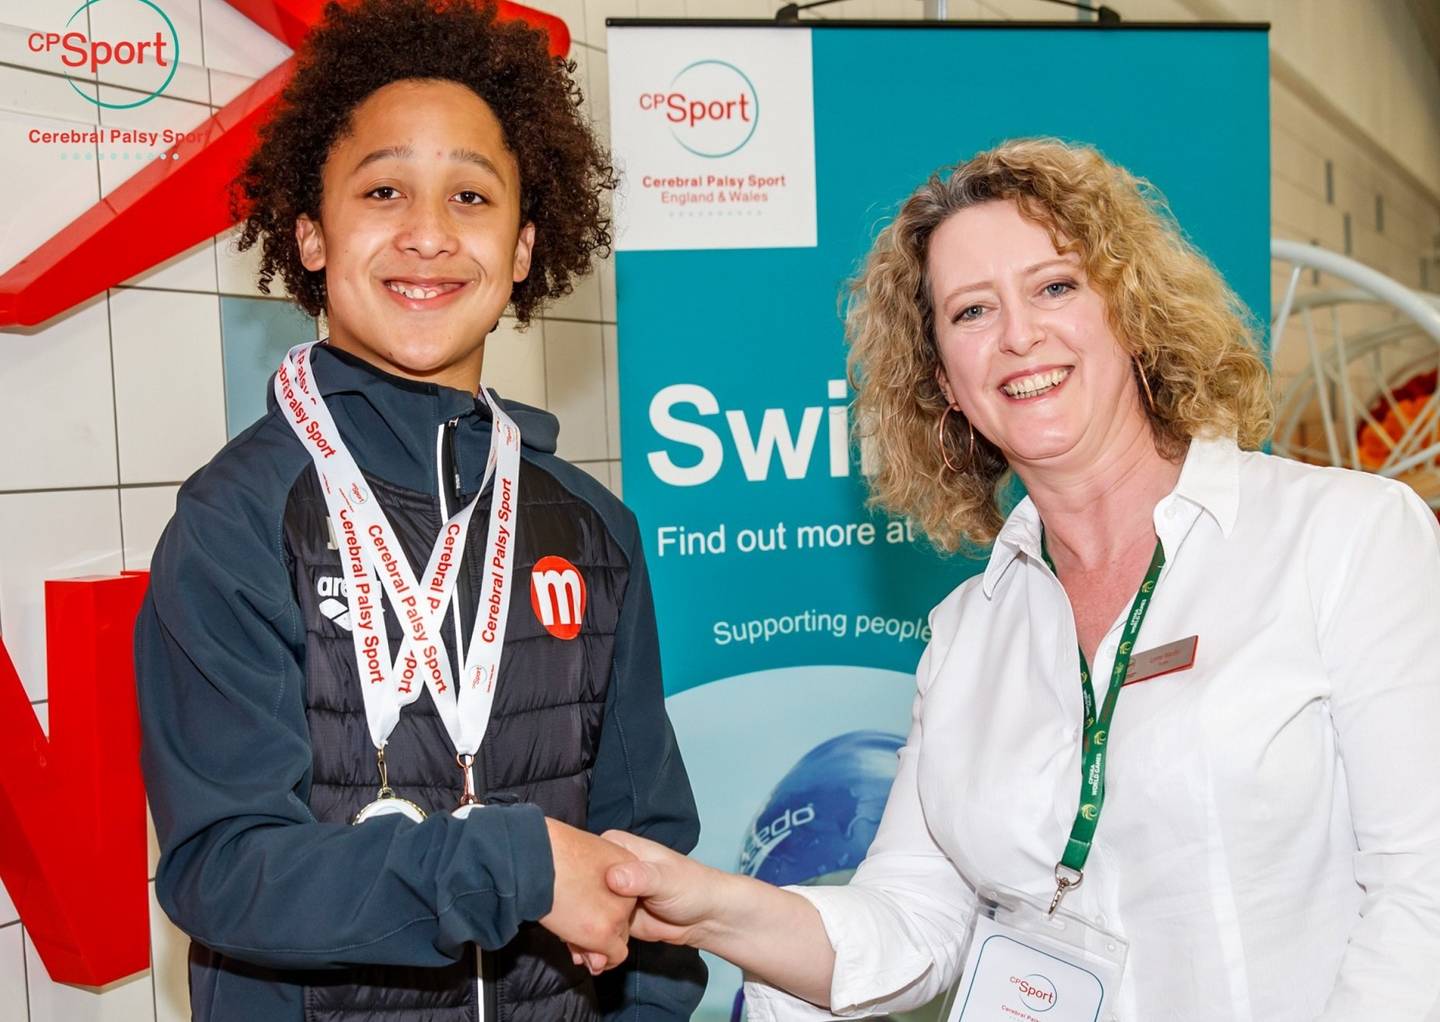 Lynne Wardle awarding a young swimmer with his medal at Swimming Championships